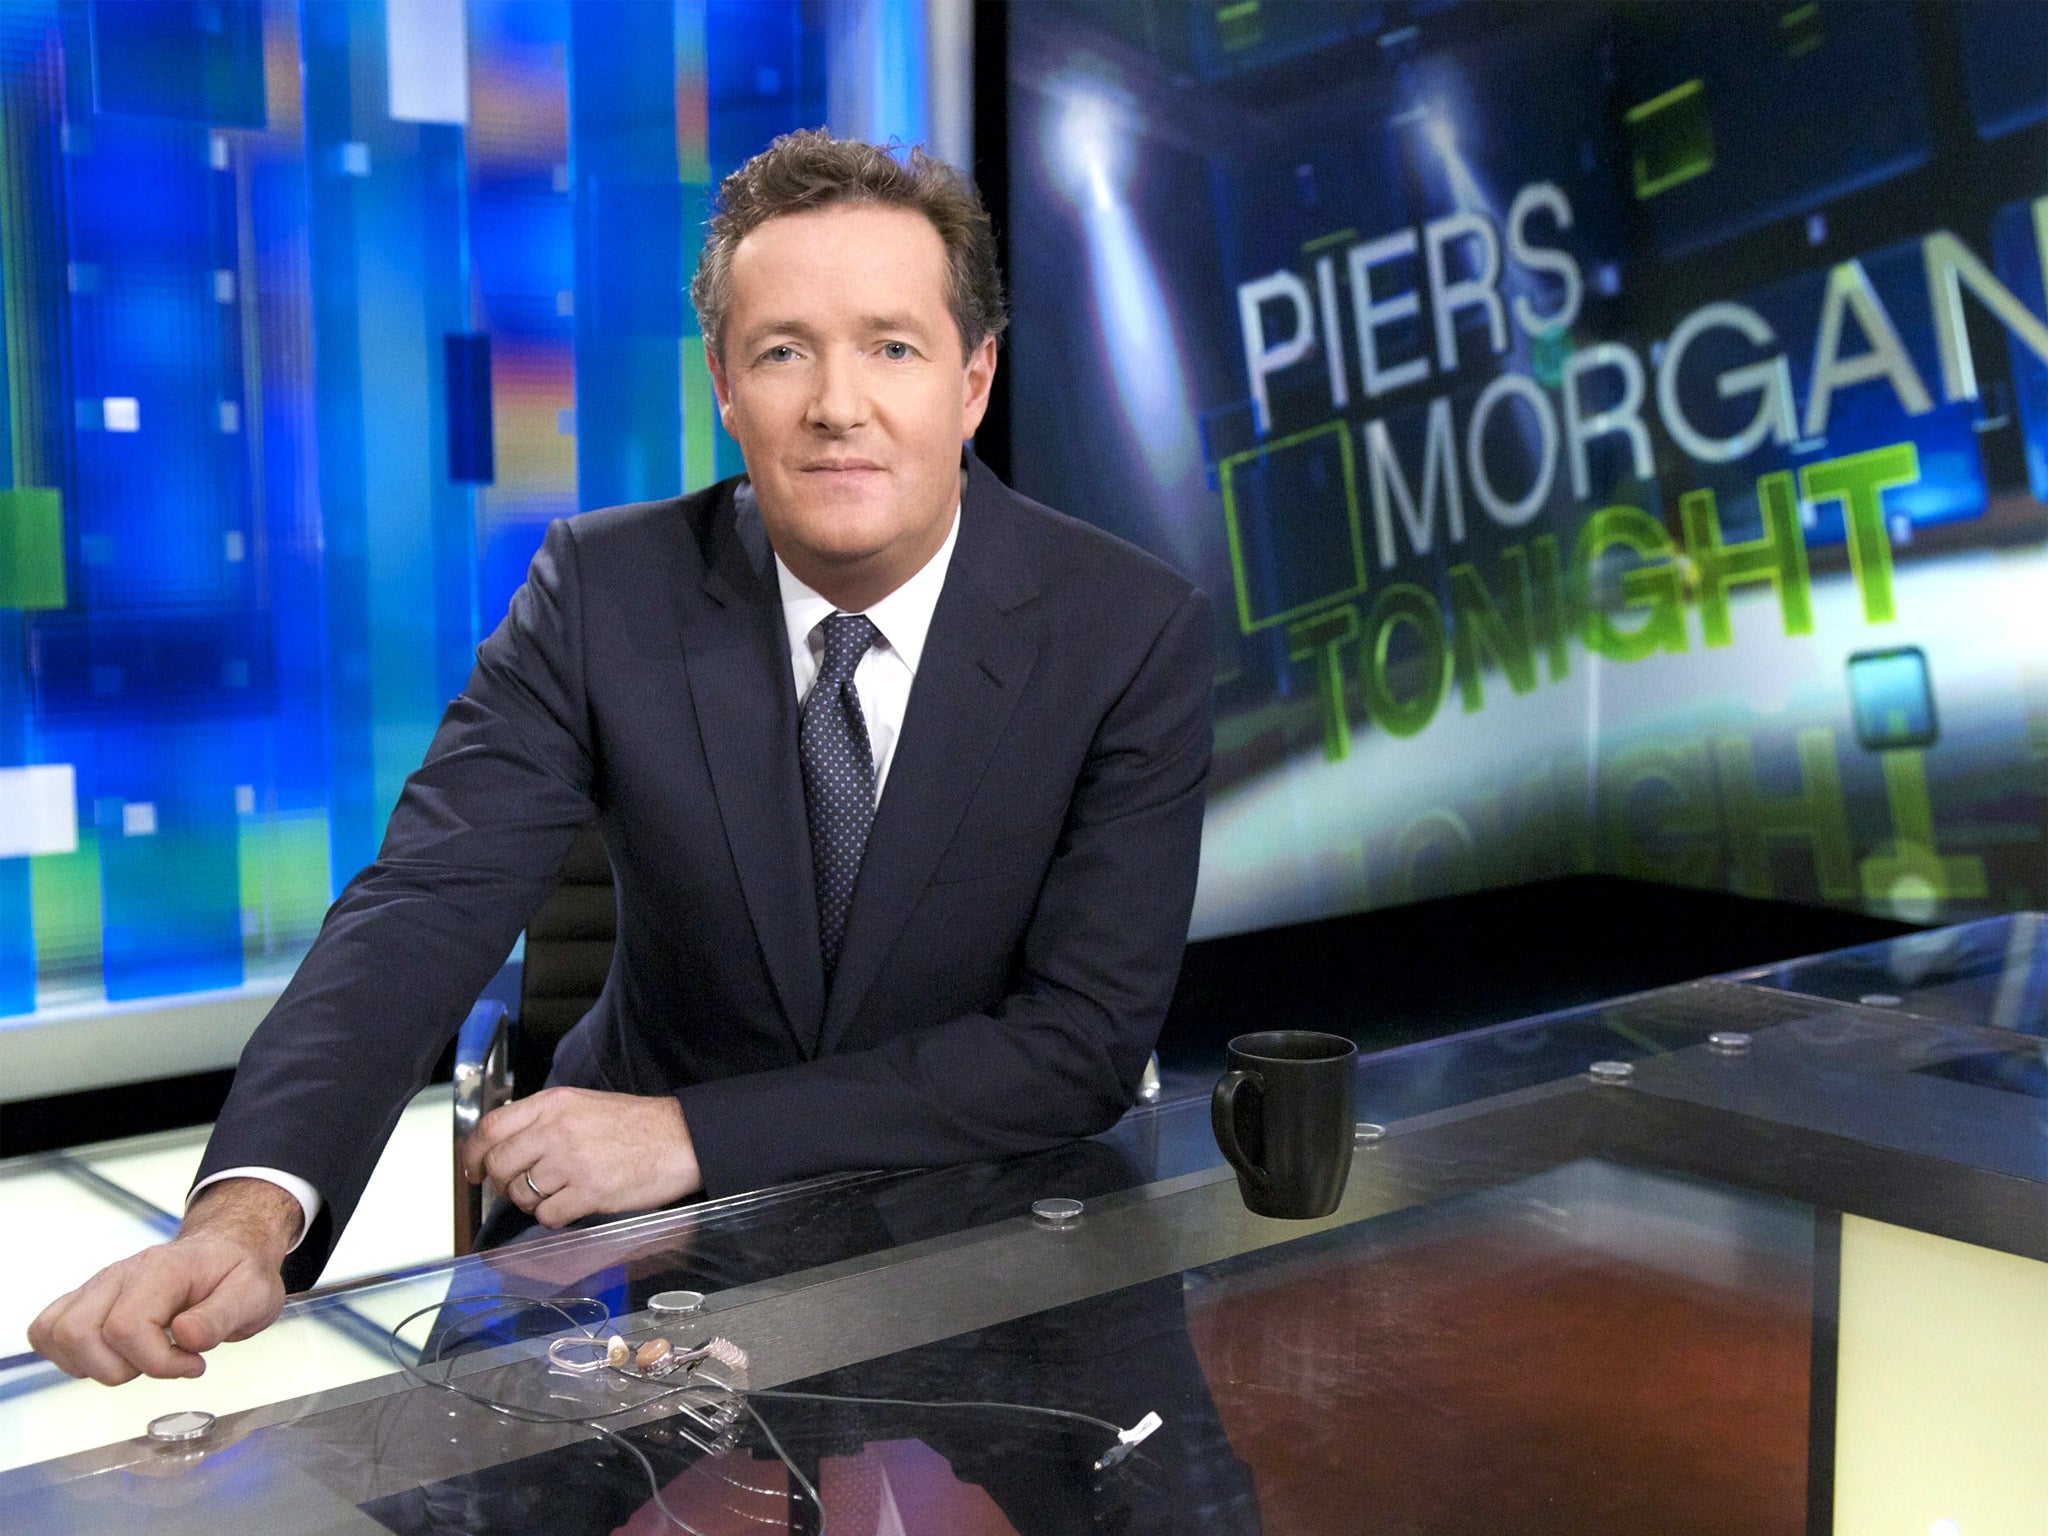 Morgan has frequently debated gun control during the three-year running of Piers Morgan Live